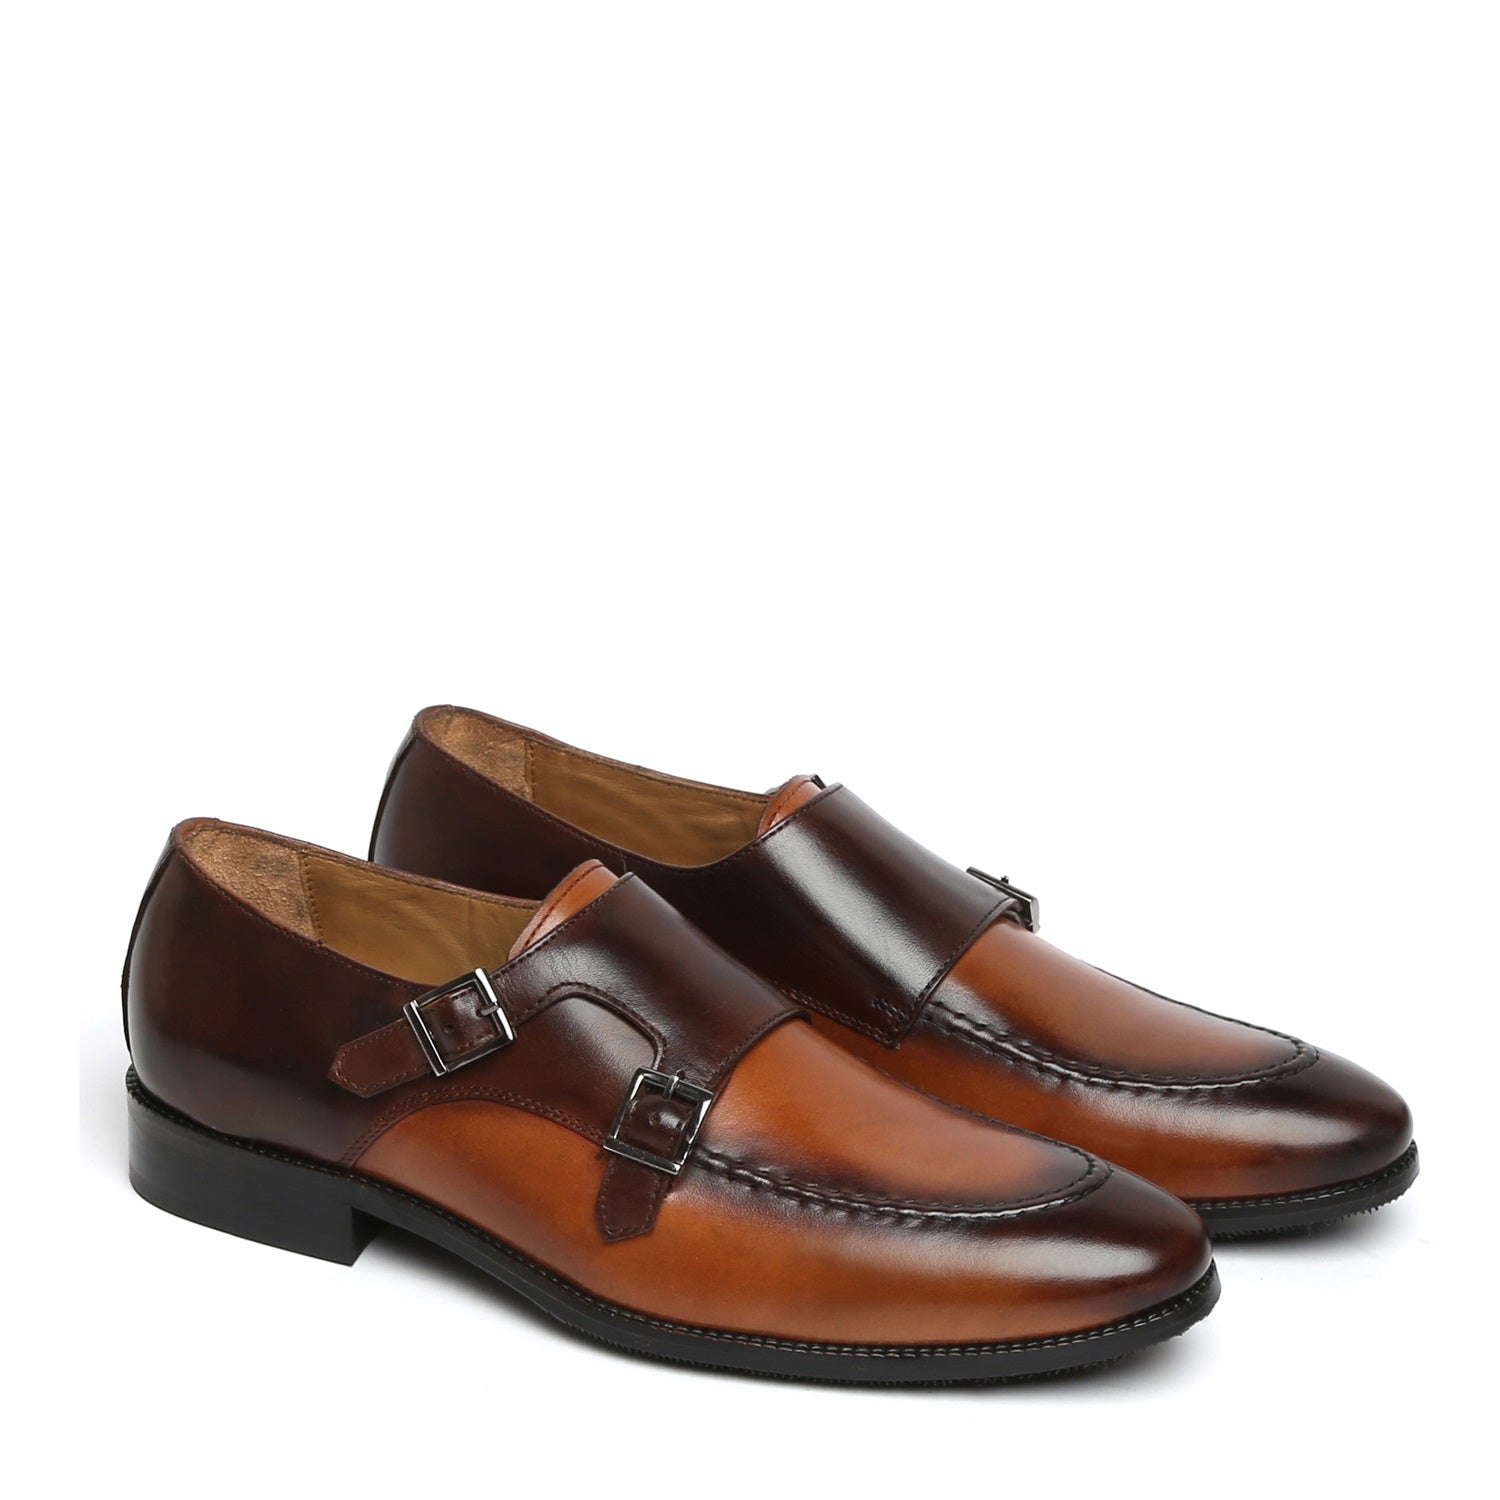 Dual Tone Tan-Brown Contrasting Double Monk Shoes